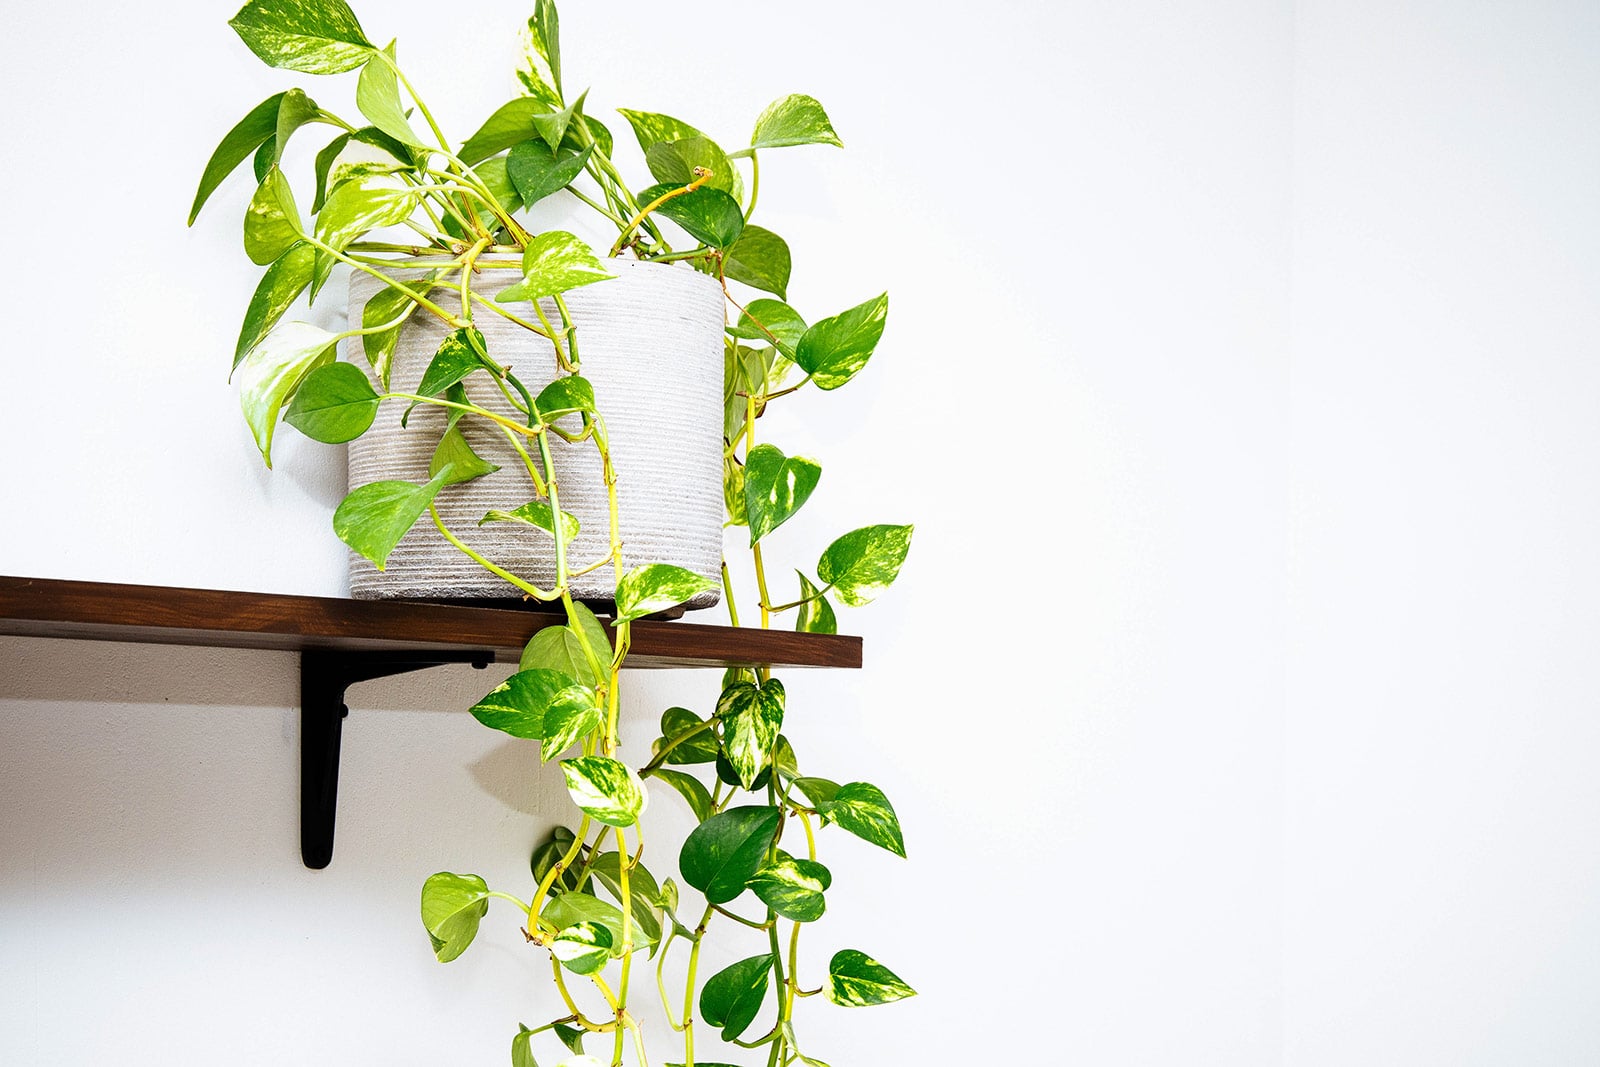 Pothos Pole Ivy - How to Care for Ivy Plants